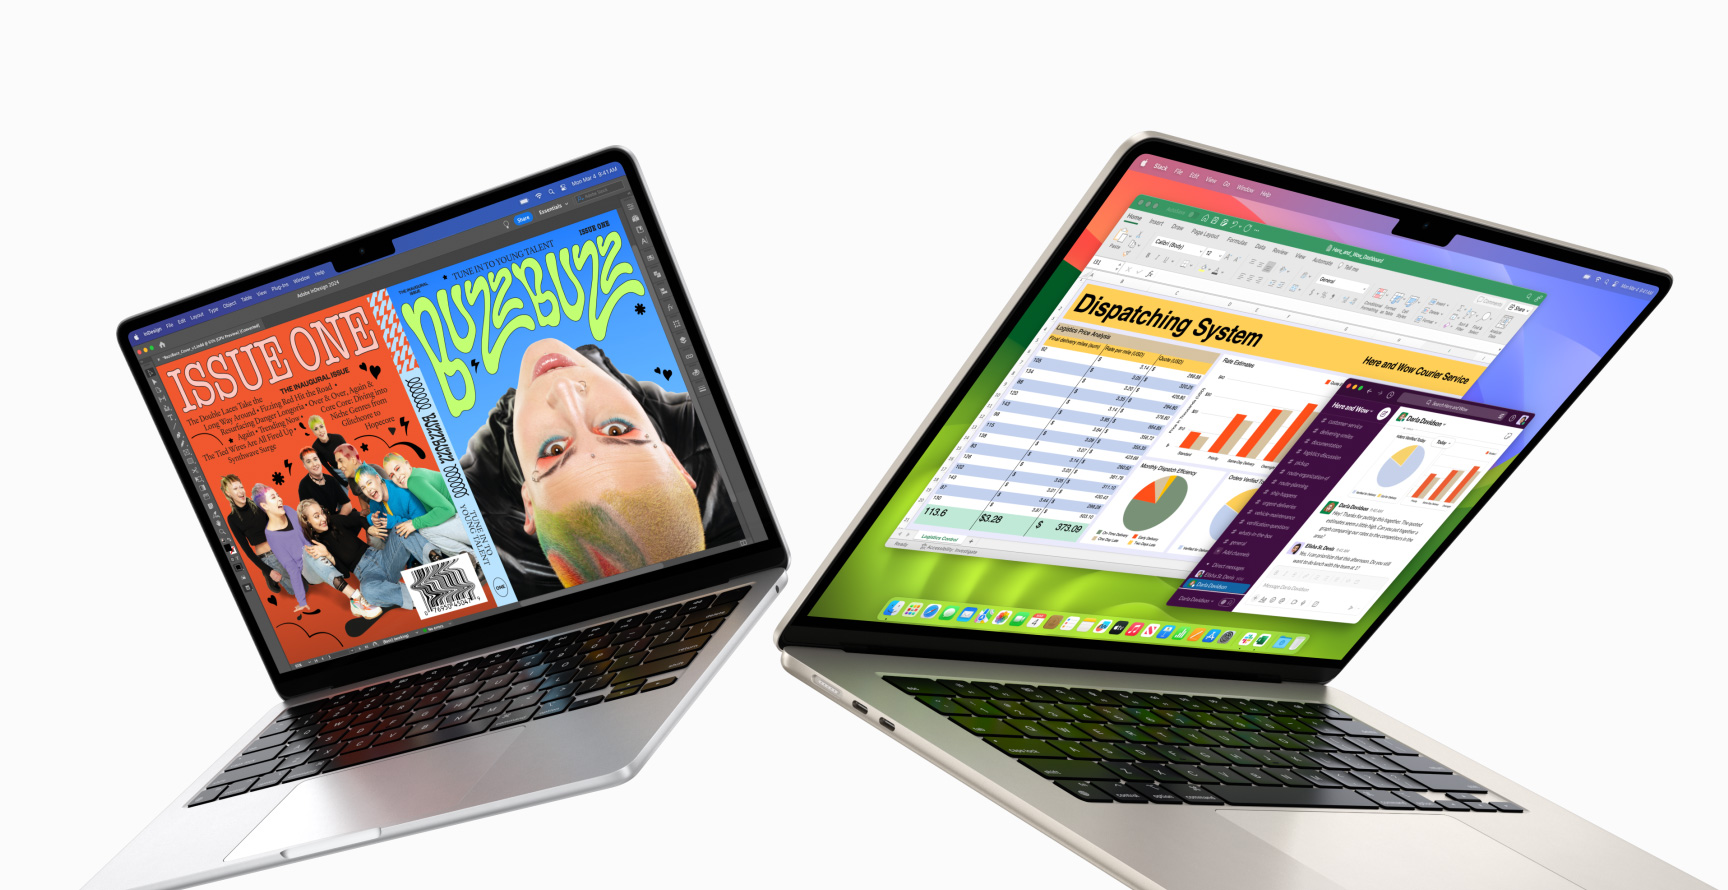 Partially open 13-inch MacBook Air on left and 15-inch MacBook Air on right. 13-inch screen shows colourful ‘zine cover created with In Design. 15-inch screen shows Microsoft Excel and Slack.